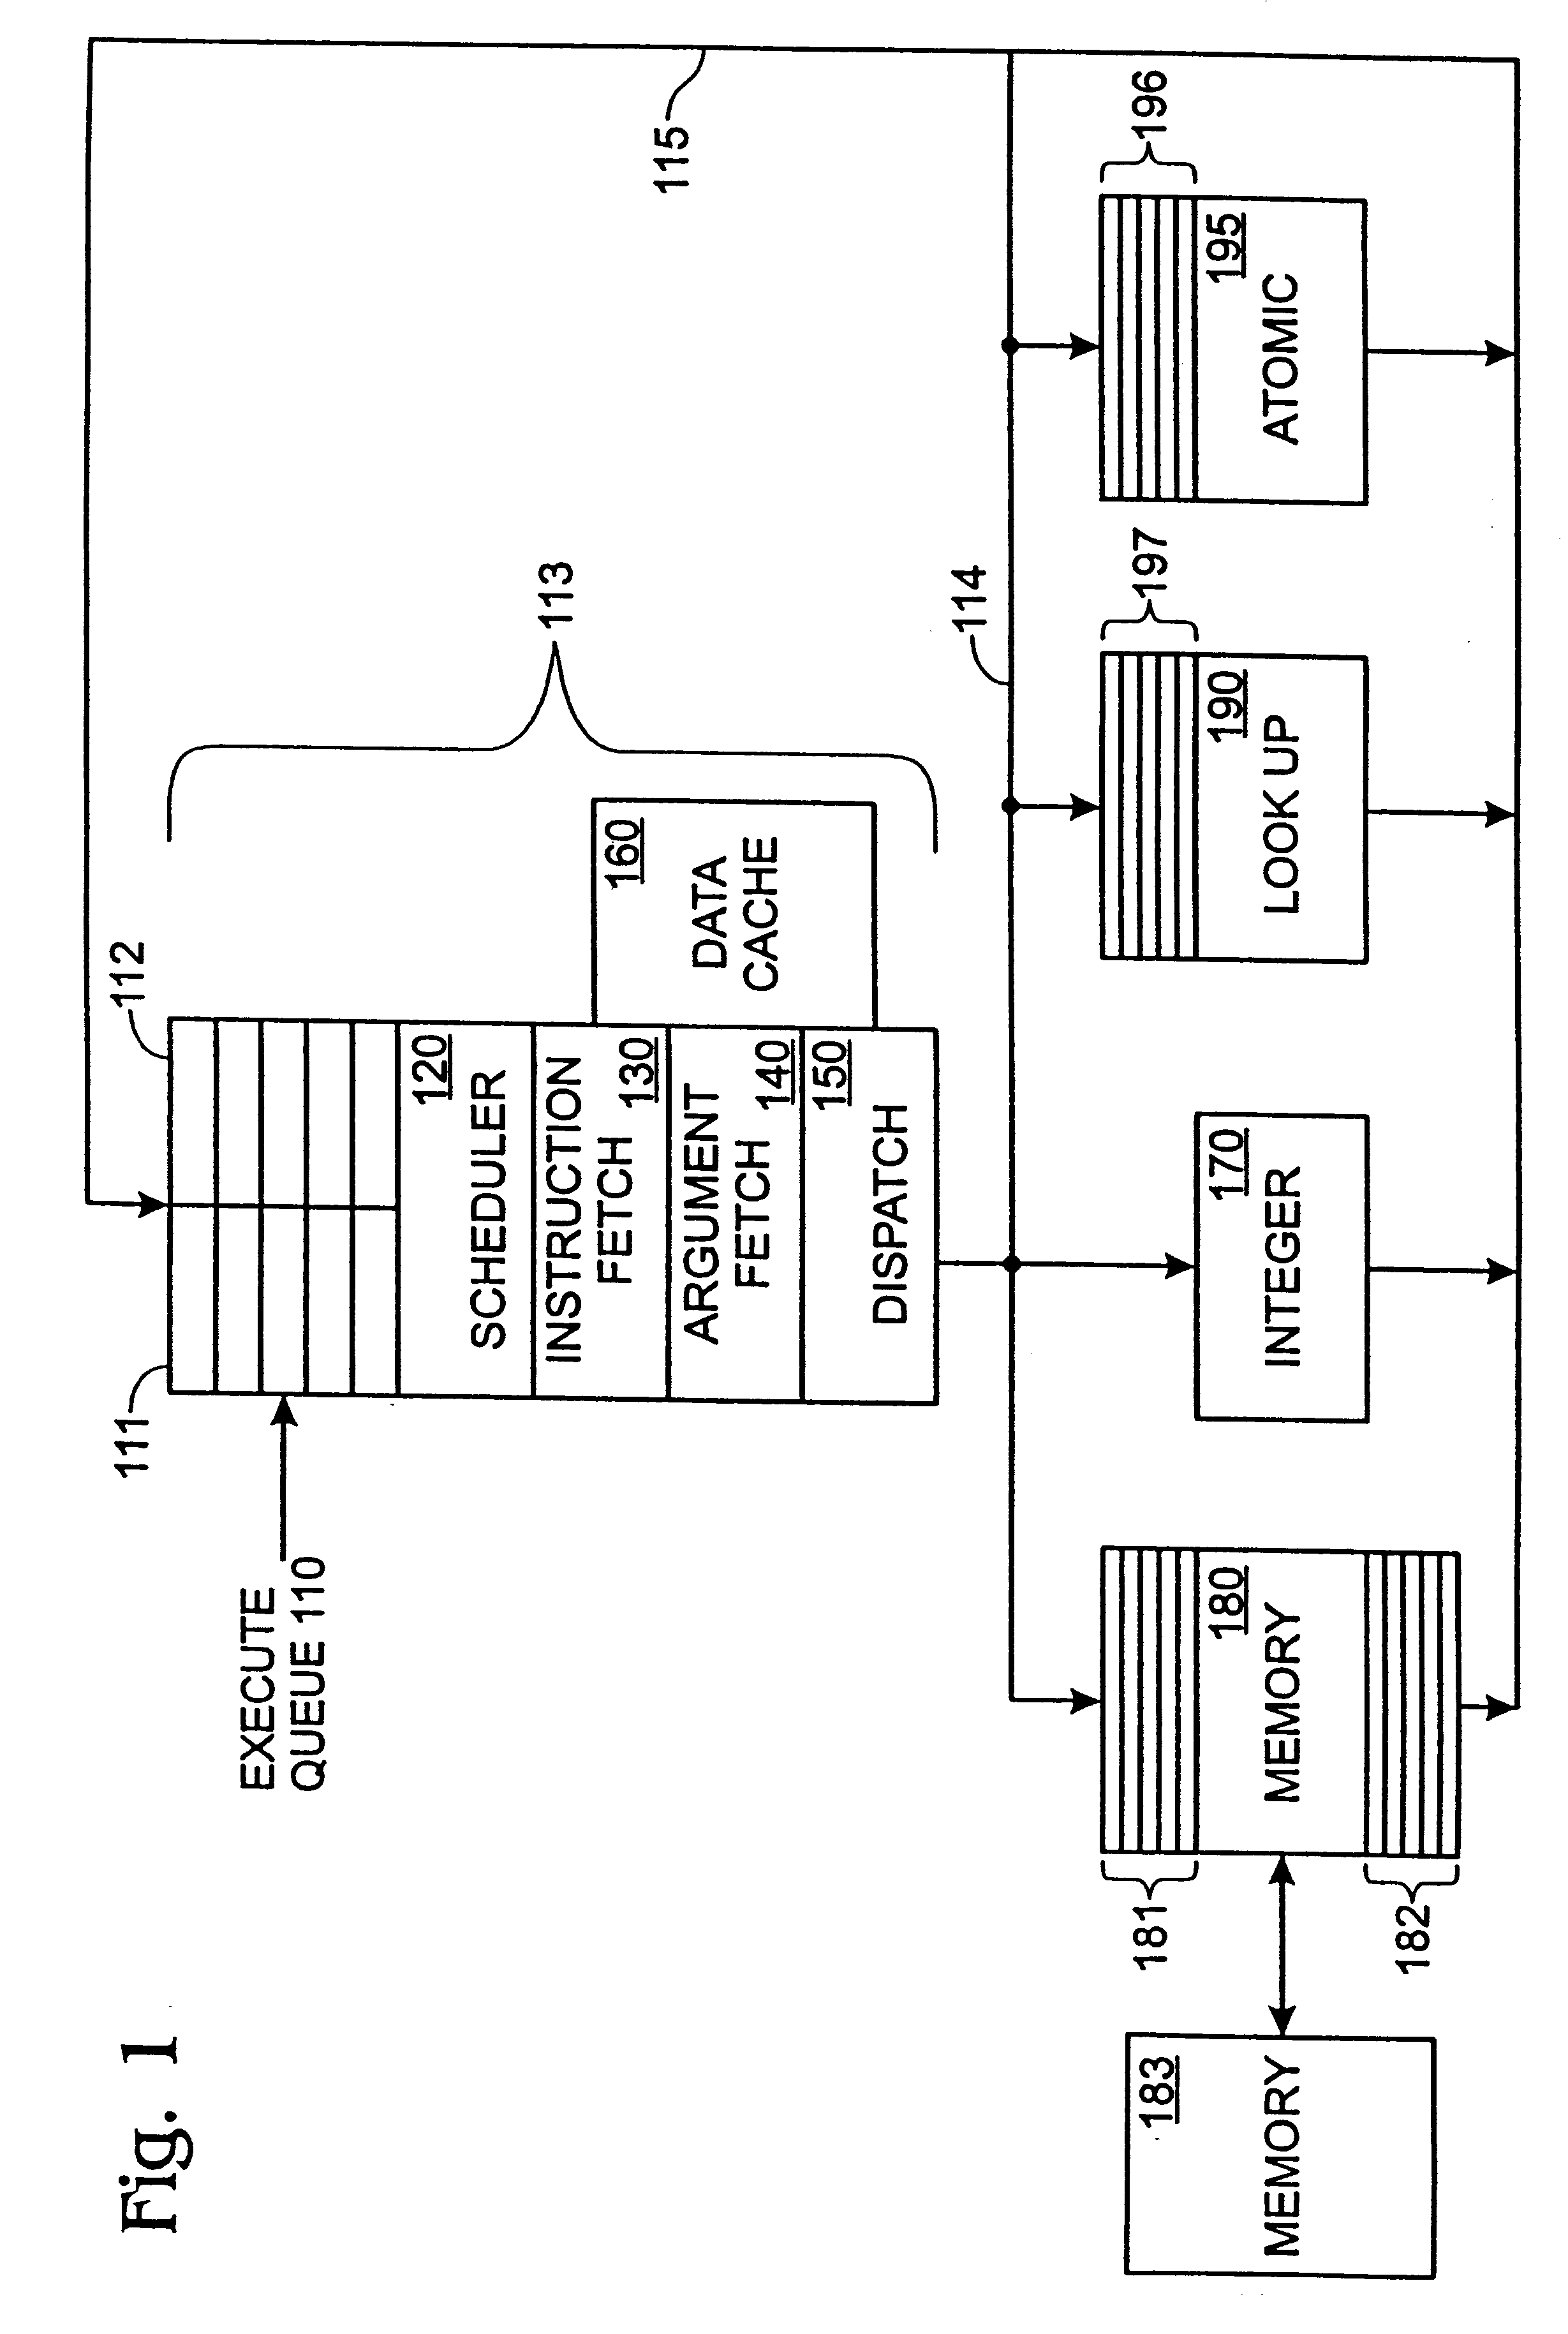 Distributed pipeline memory architecture for a computer system with even and odd pids